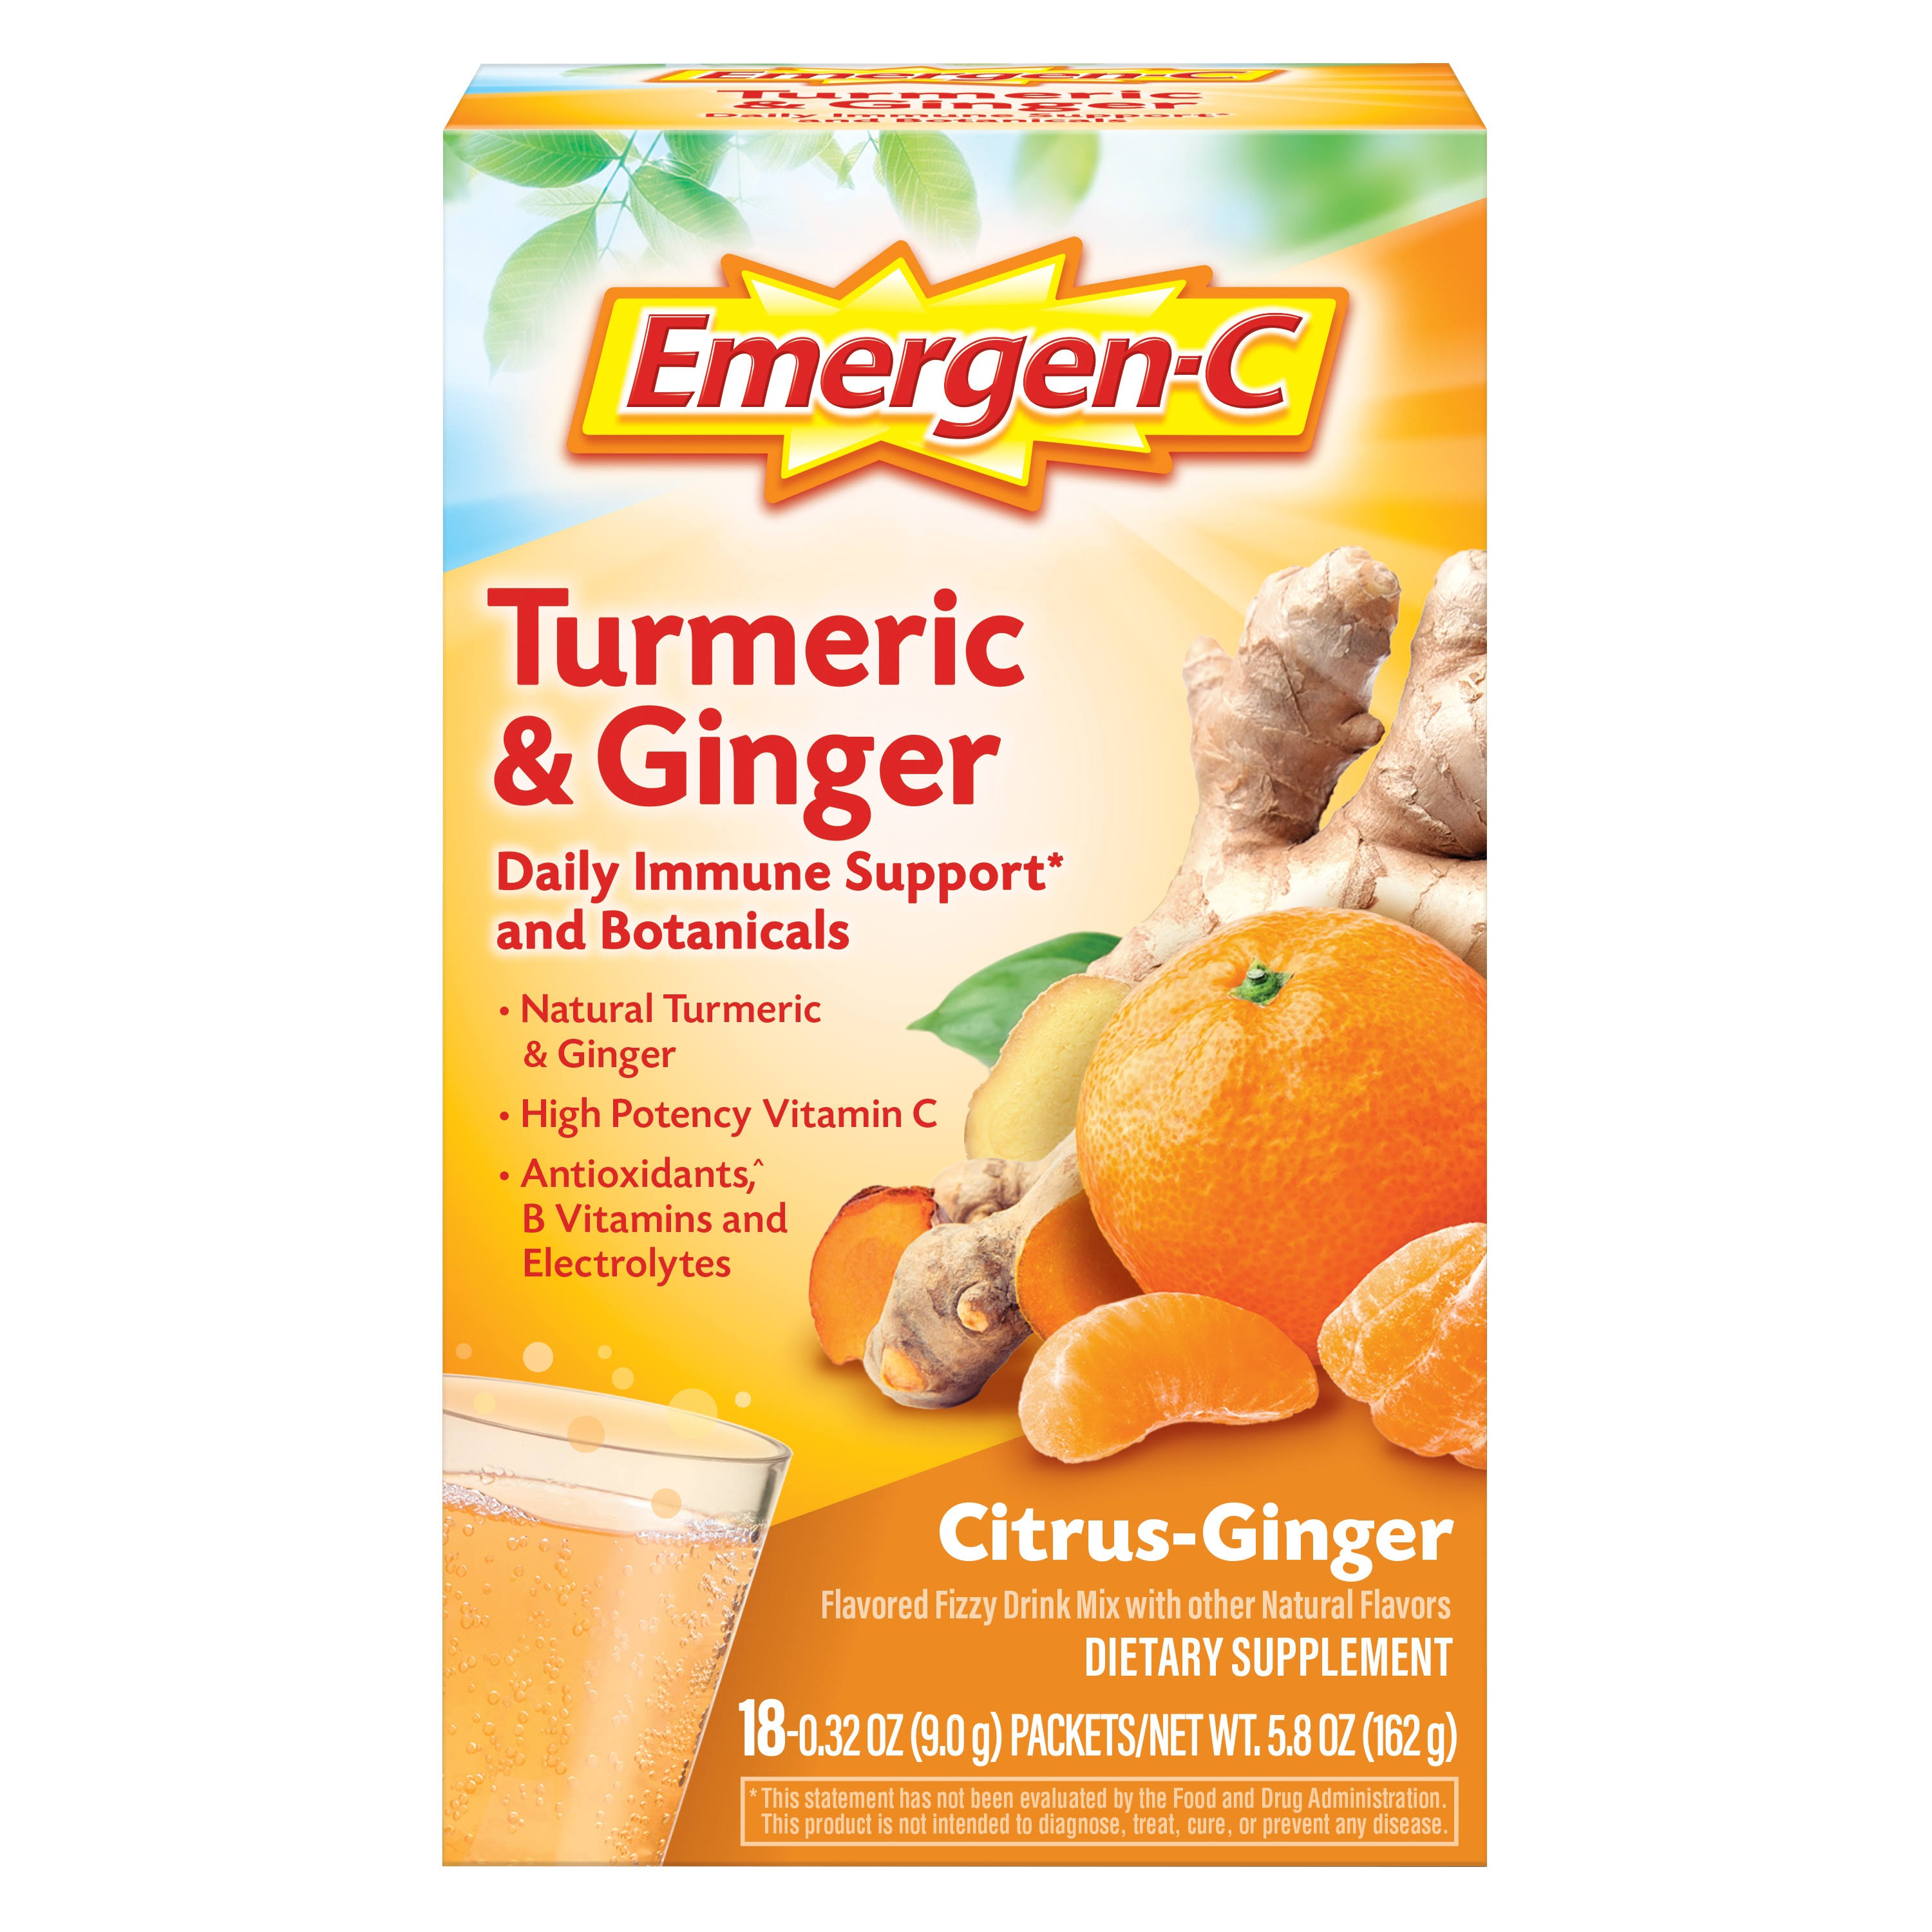 Emergen-C Citrus-Ginger Fizzy Drink Mix Turmeric and Ginger Immune Support Natural Flavors with High Potency Vitamin C 18 Count